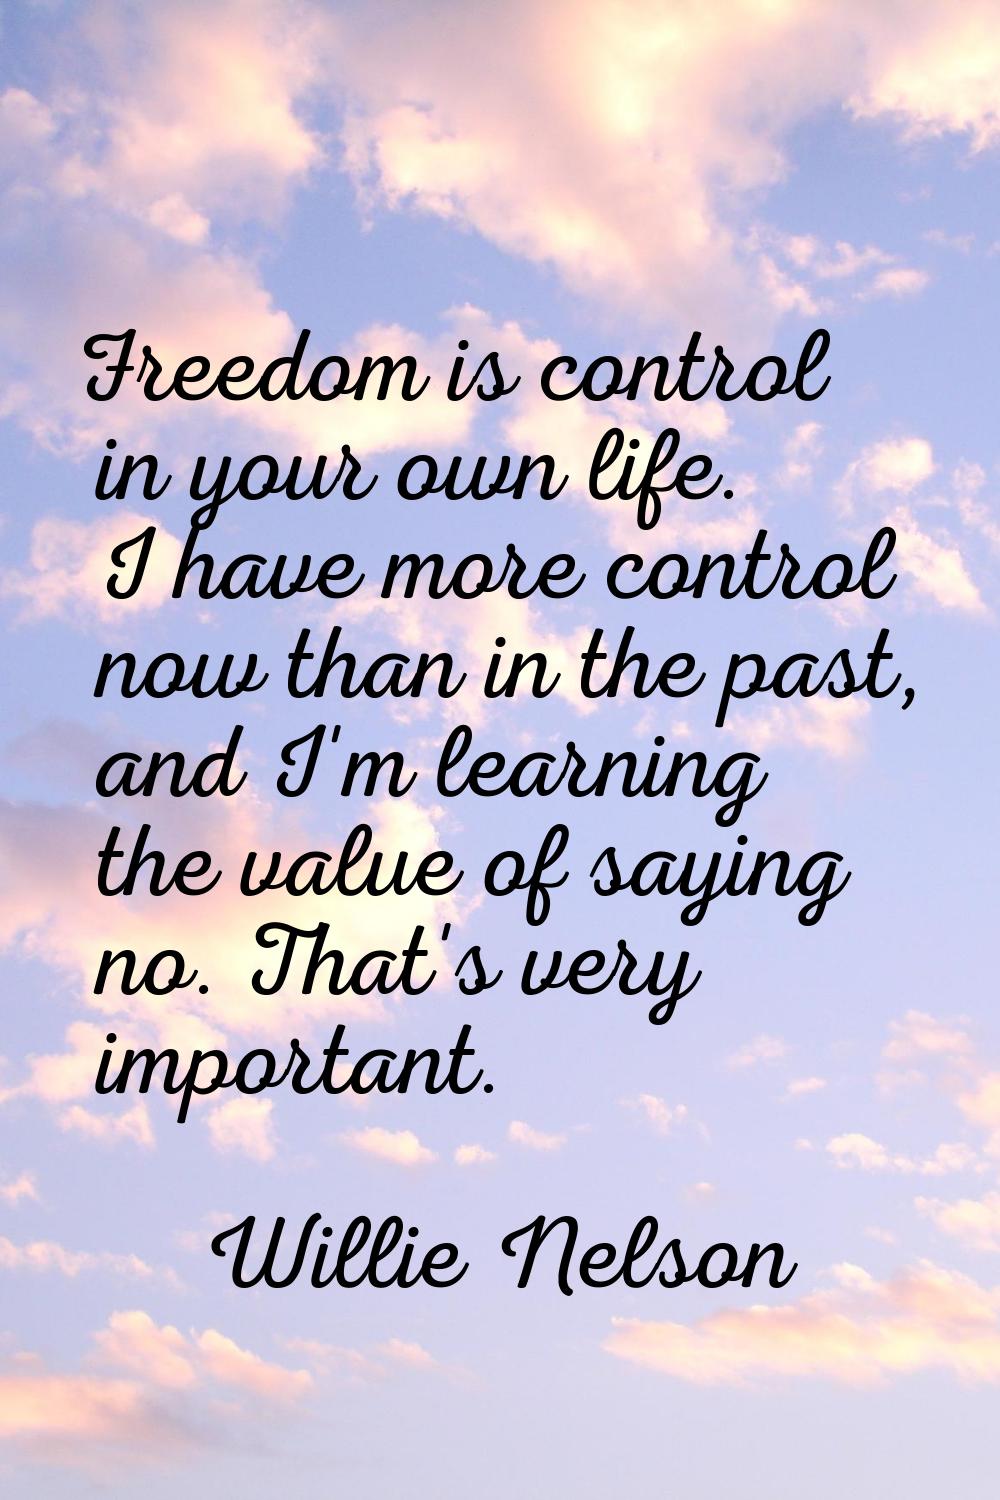 Freedom is control in your own life. I have more control now than in the past, and I'm learning the